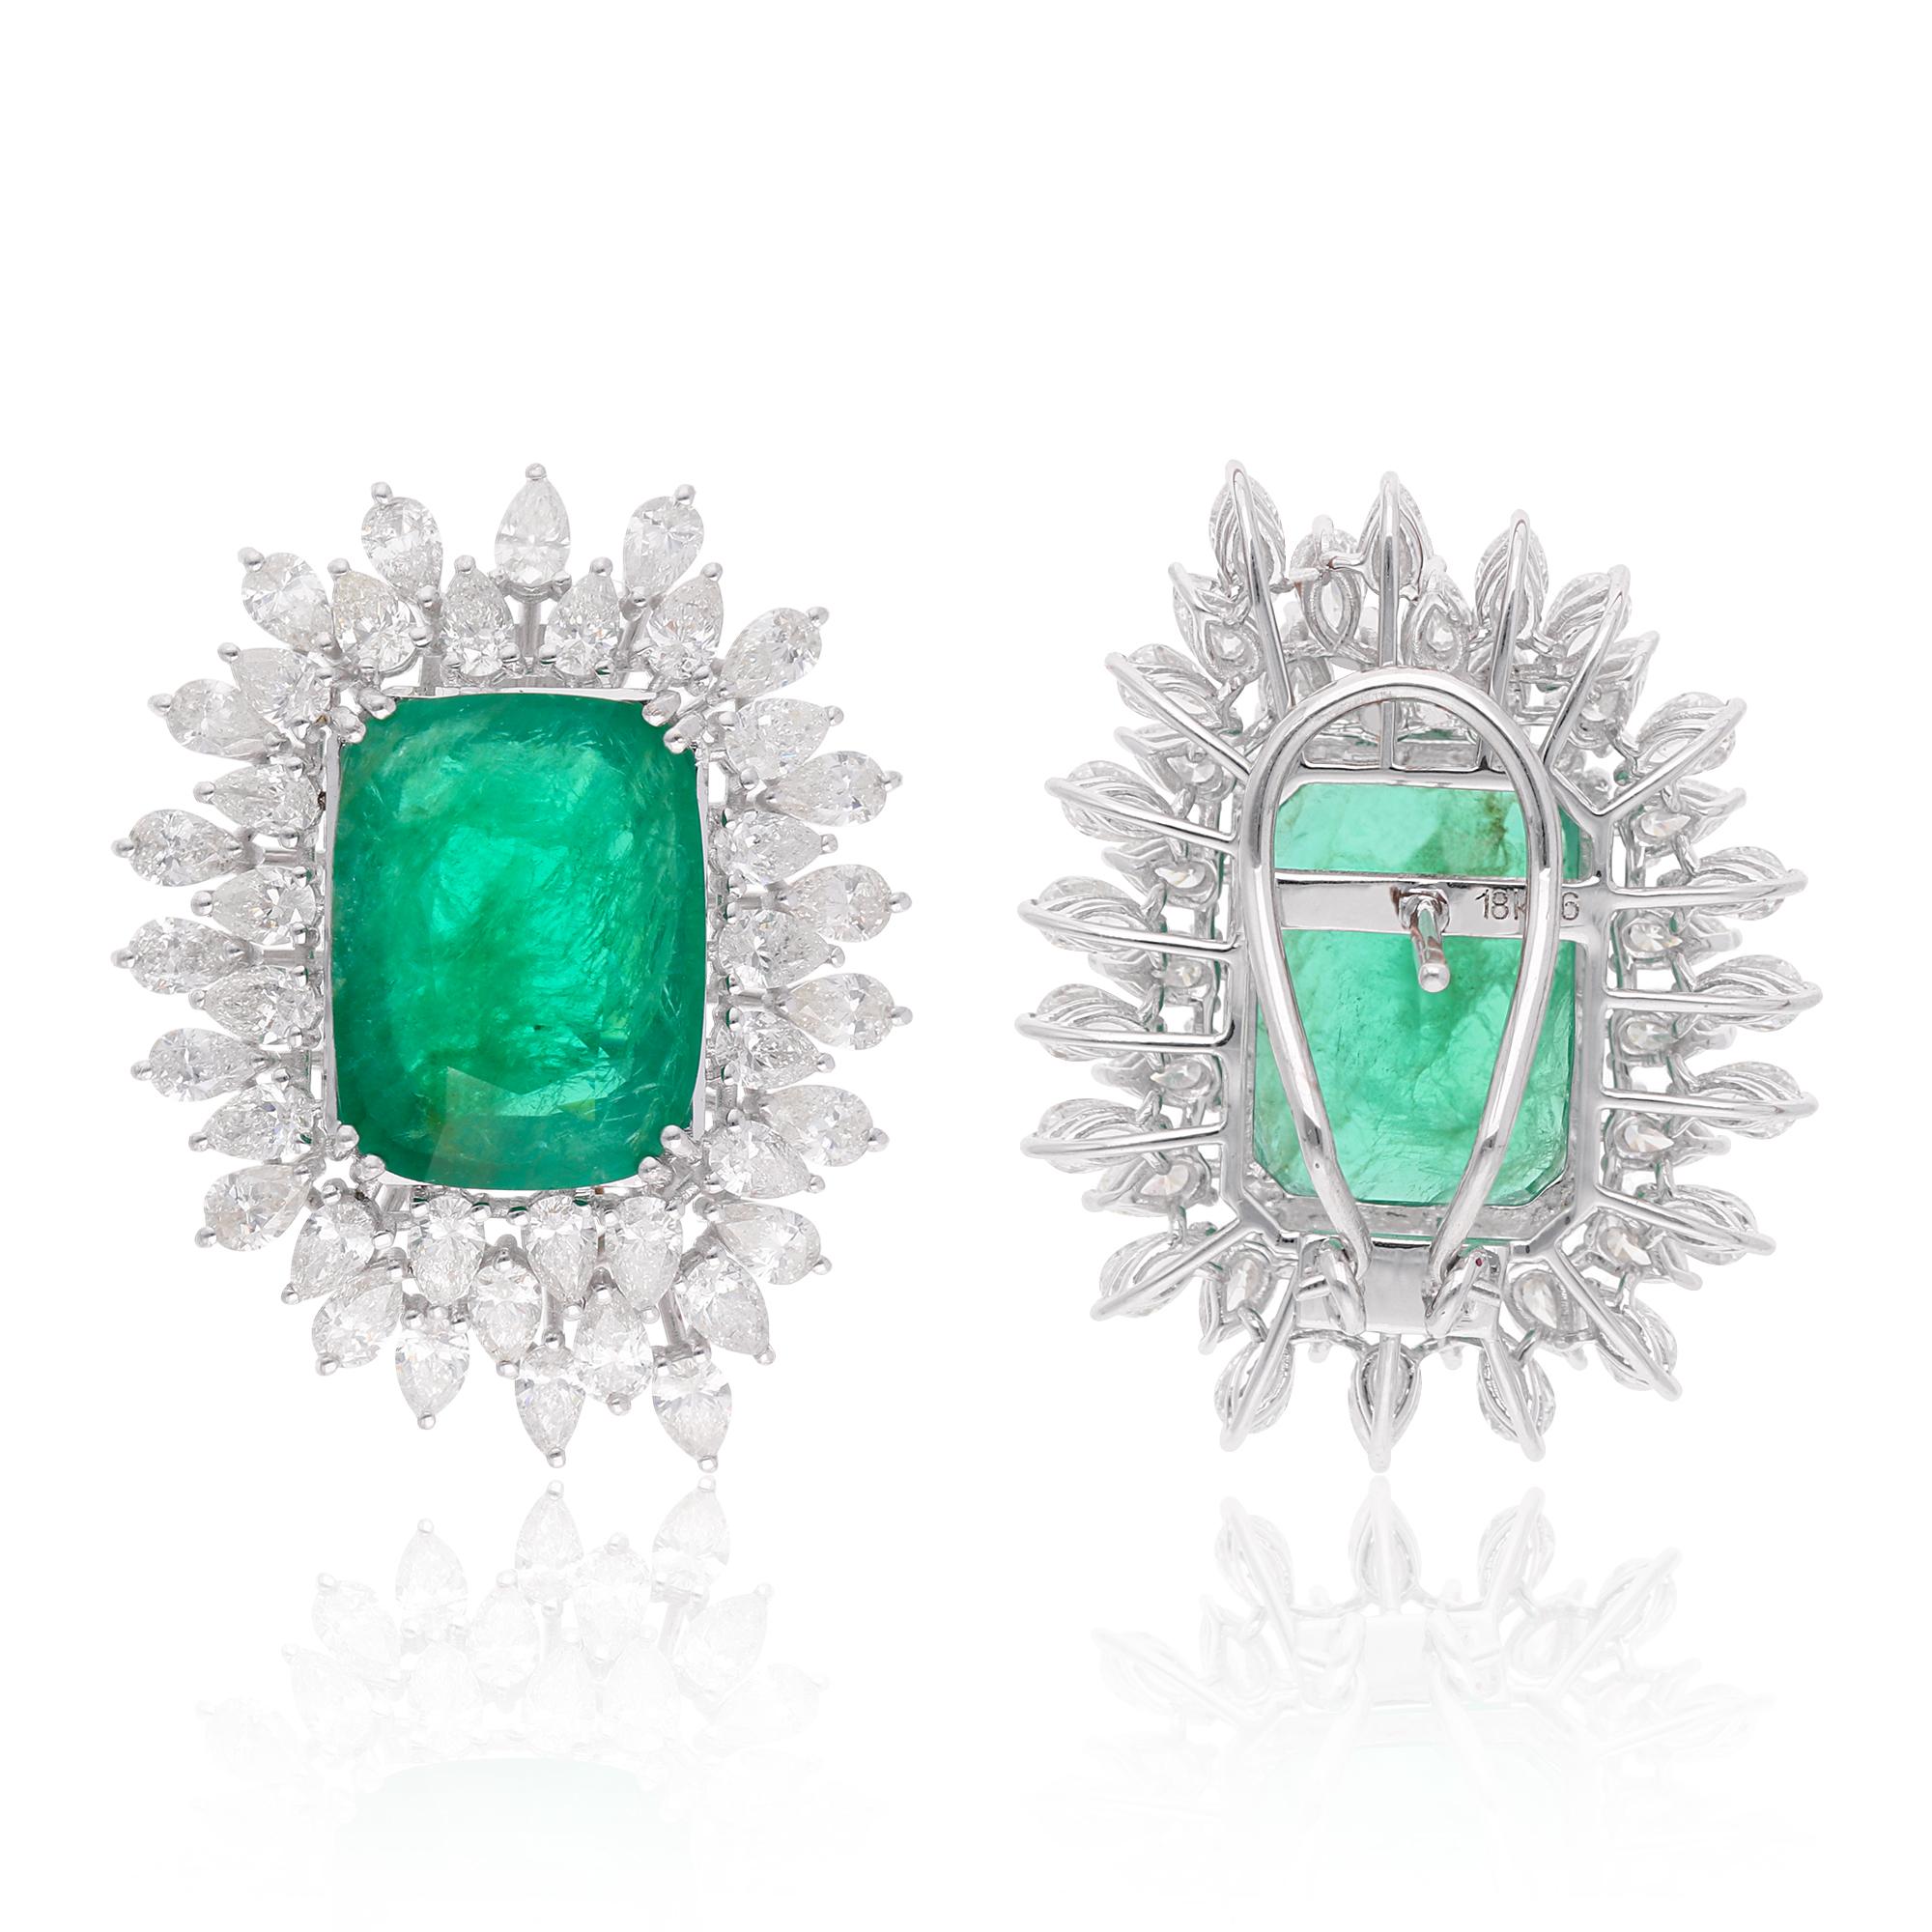 Item Code :- SEE-12976
Gross Wt. :- 15.69 gm
18k White Gold Wt. :- 11.66 gm
Diamond Wt. :- 6.25 Ct. ( AVERAGE DIAMOND CLARITY SI1-SI2 & COLOR H-I )
Emerald Wt. :- 13.90 Ct.
Earrings Size :- 30 mm approx.

✦ Sizing
.....................
We can adjust